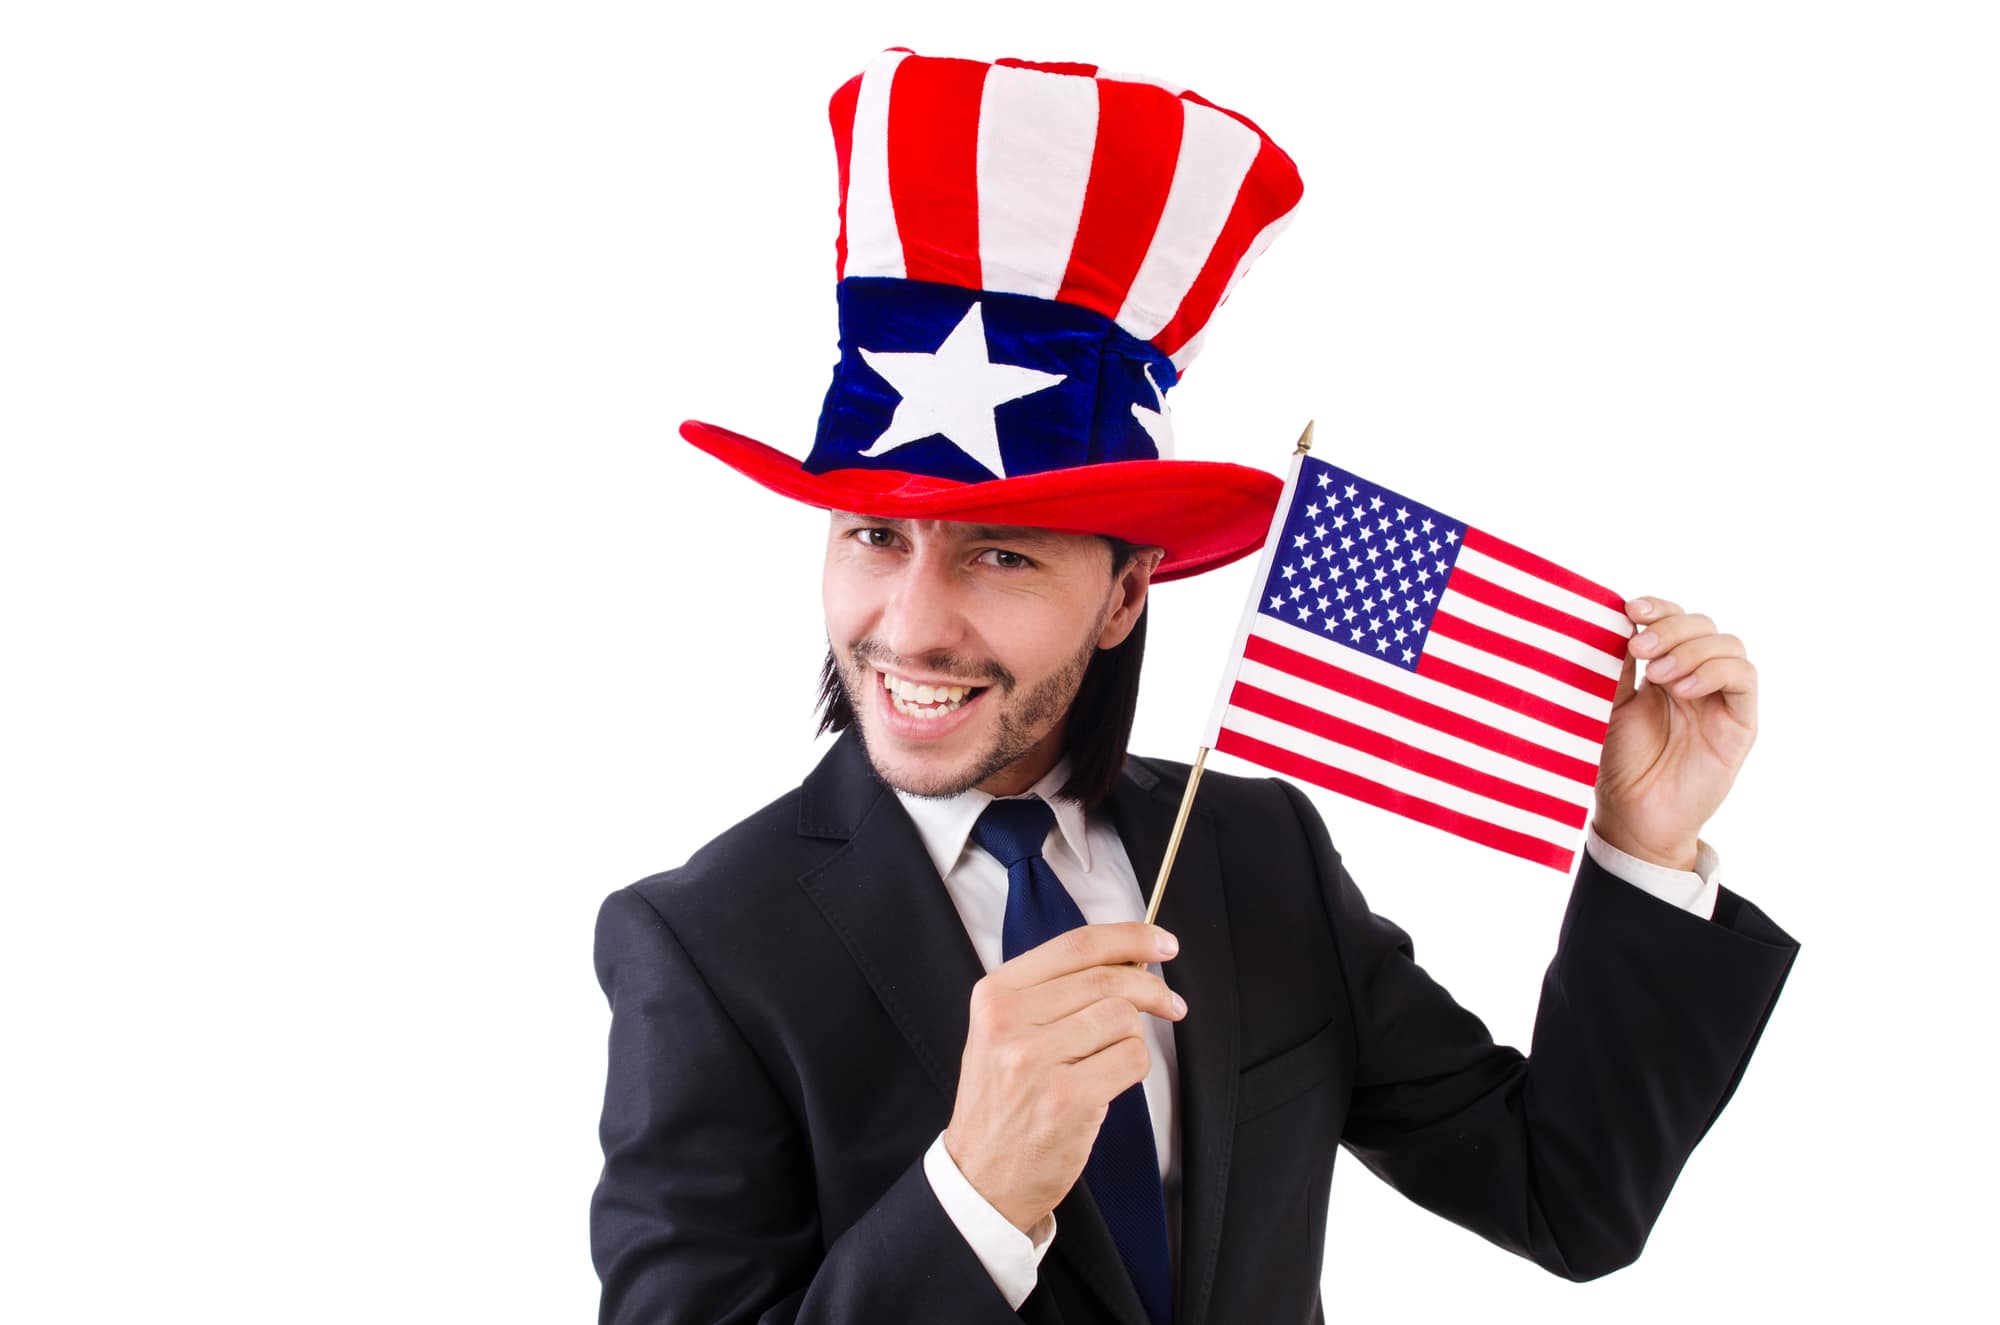 LIVE YOUR AMERICAN DREAM WITH E2 VISA